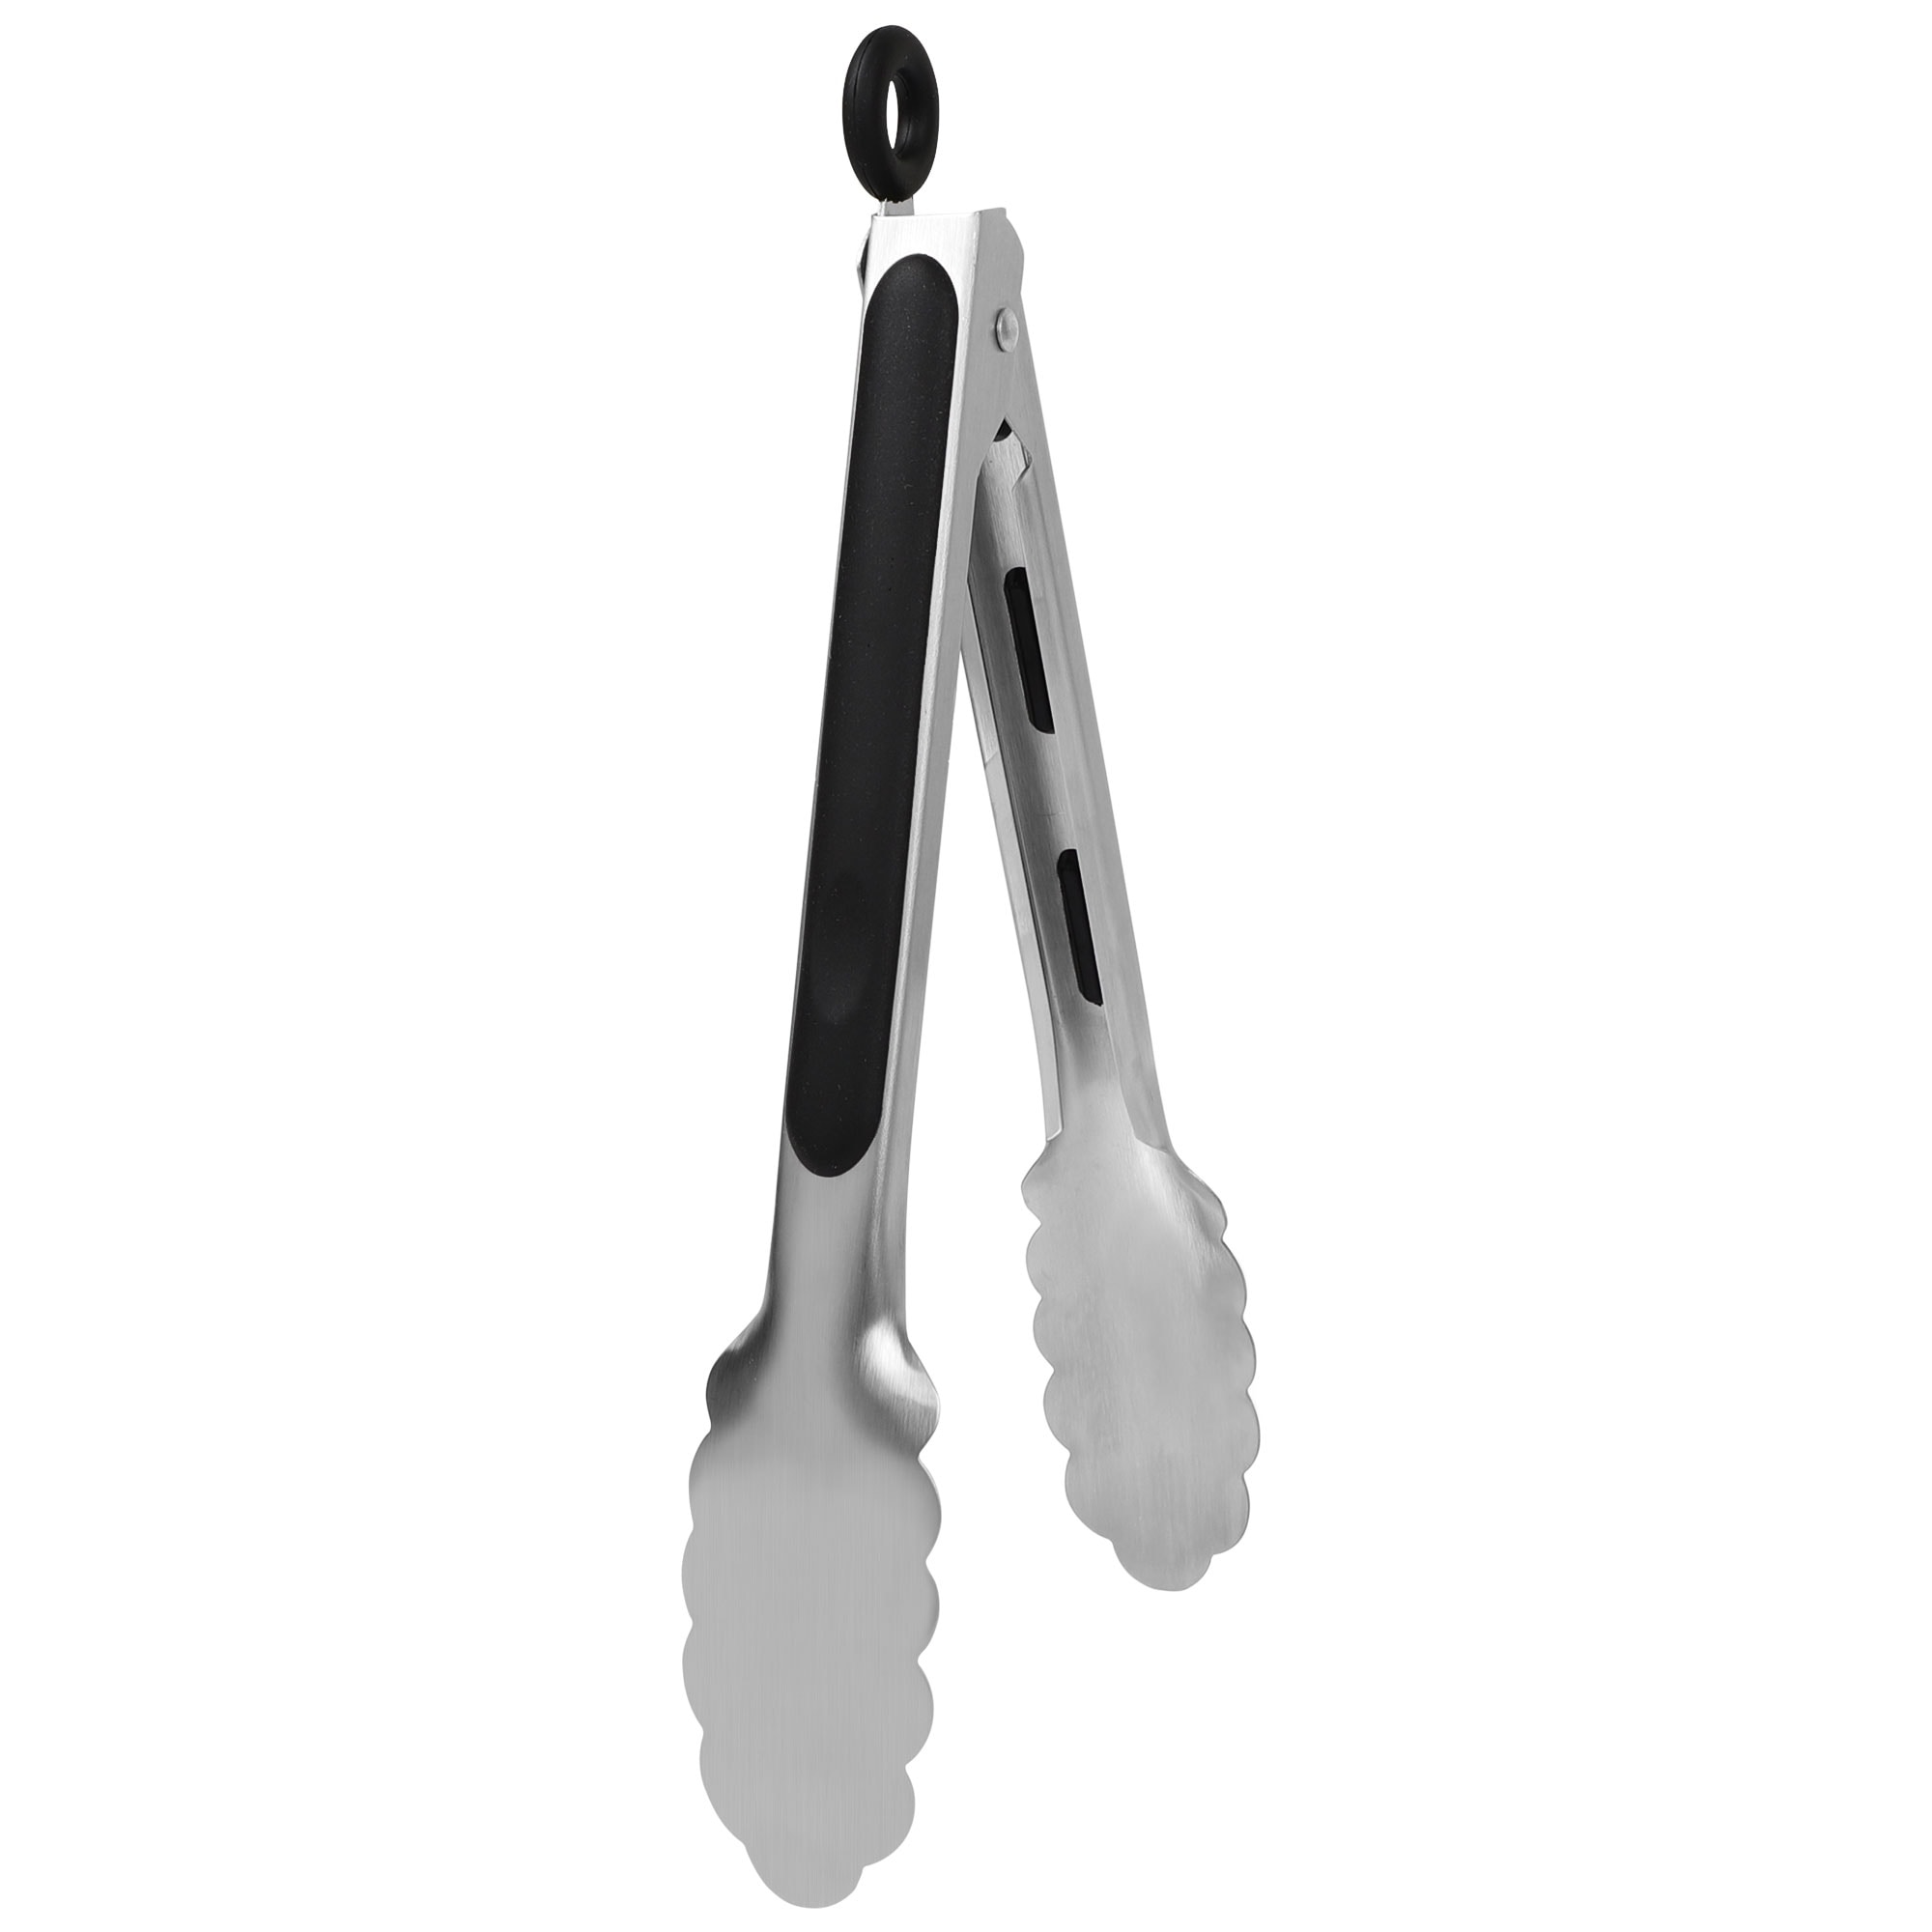 https://ak1.ostkcdn.com/images/products/is/images/direct/cea3840a2639fa74df4e5d619783c08492f1f4f2/Kitchen-Tongs-for-Cooking-Stainless-Steel-Tongs-Silicone-Grip-Grill.jpg